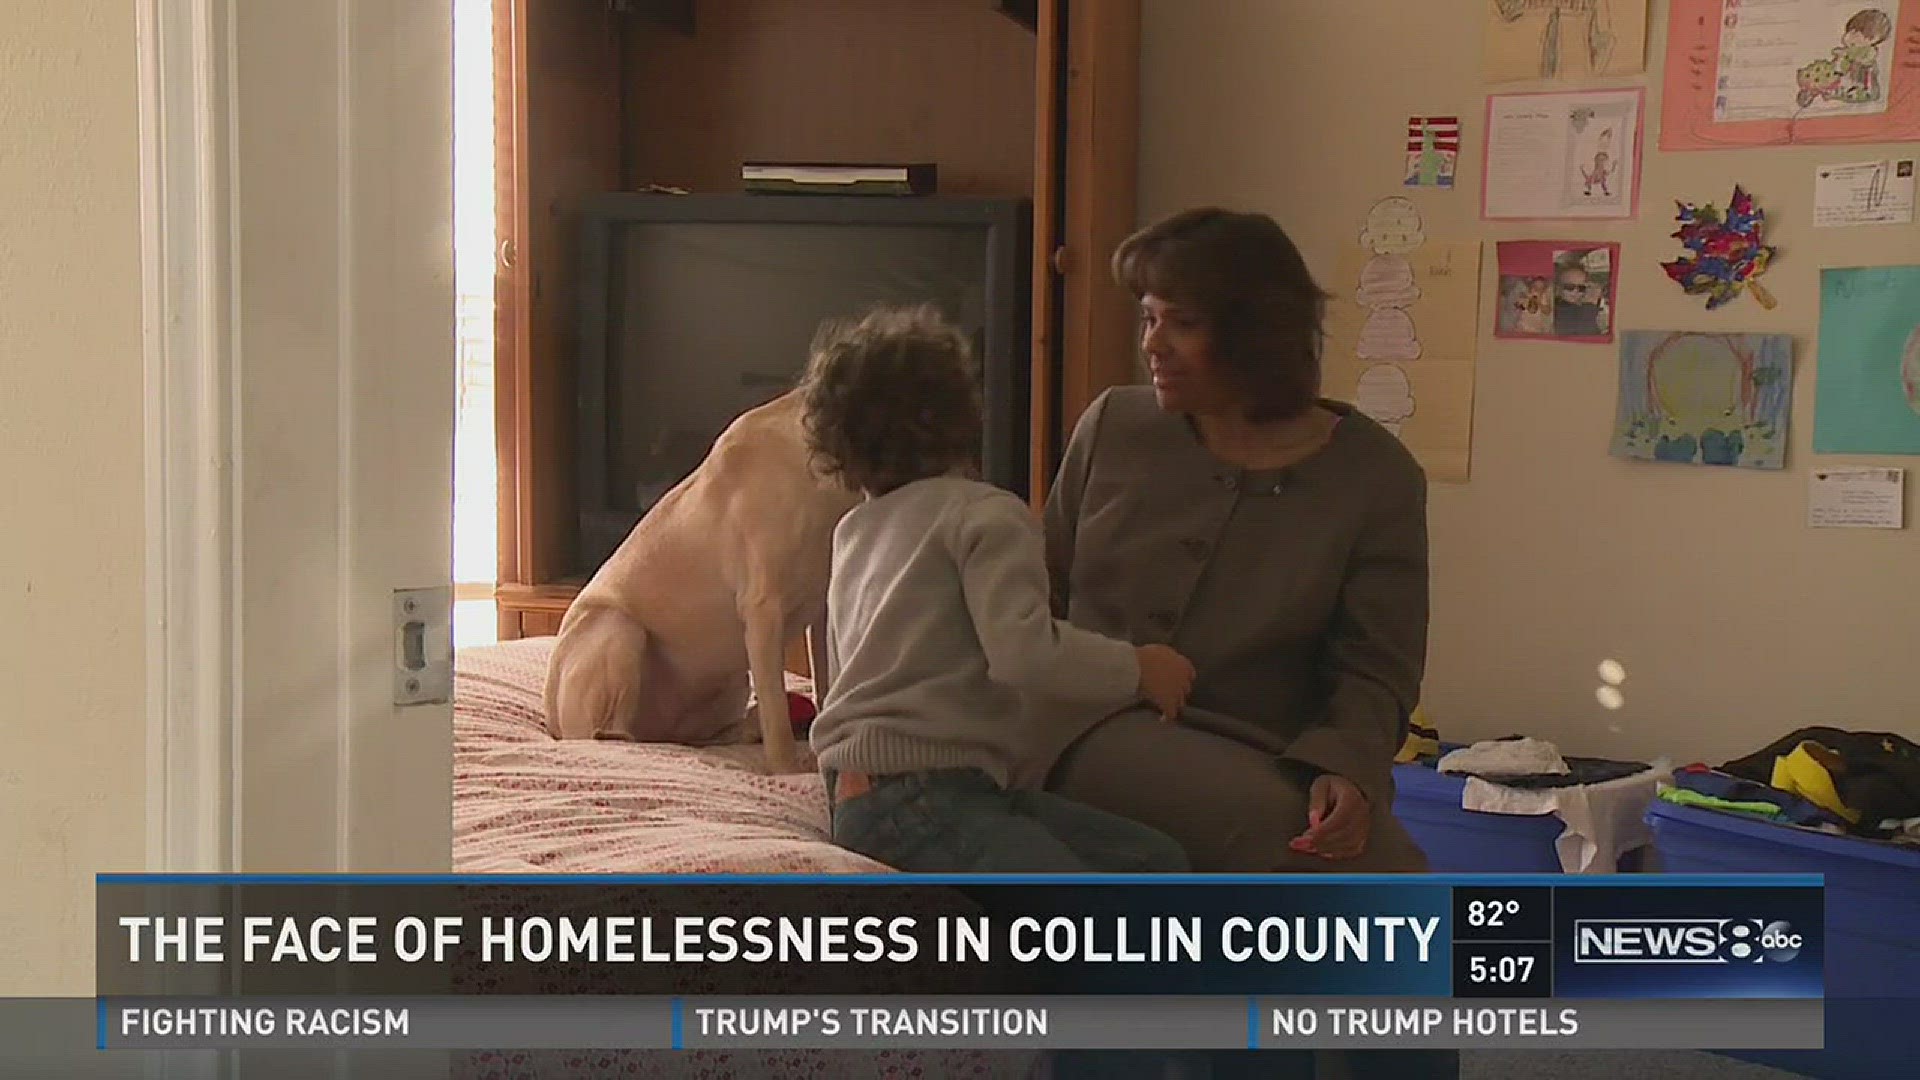 The face of homelessness in Collin County